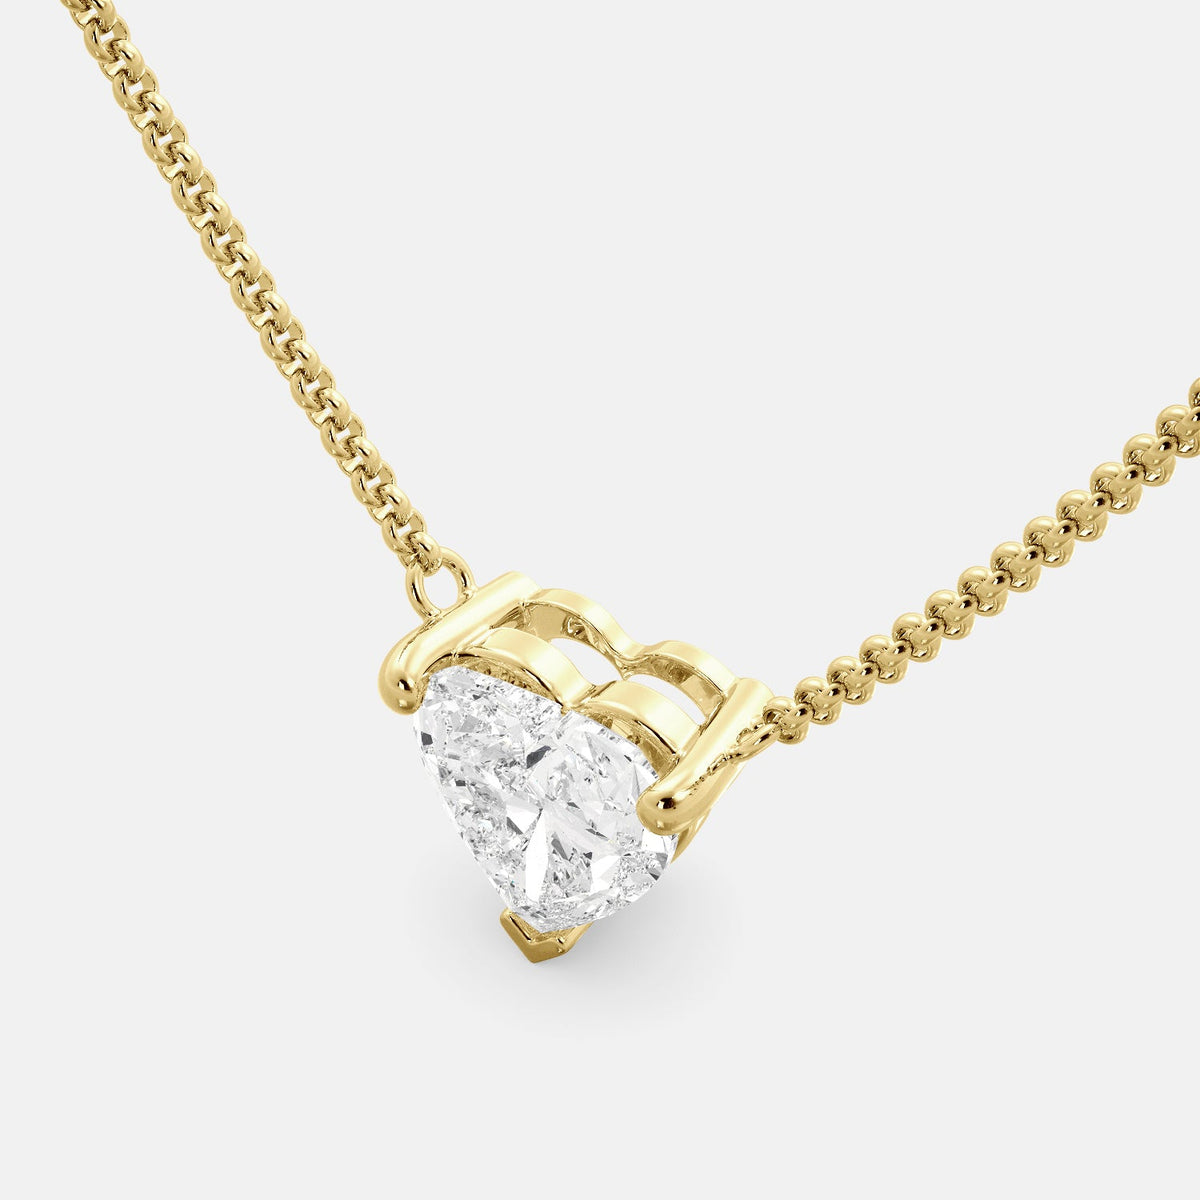 A close-up of a heart-shaped diamond necklace in recycled yellow gold. The necklace is set with a single heart-shaped diamond in the center of a pendant. The necklace is made of recycled yellow gold and has a simple, elegant design. The diamond is sparkling and reflects light beautifully. The necklace is a perfect gift for a loved one or a special occasion.